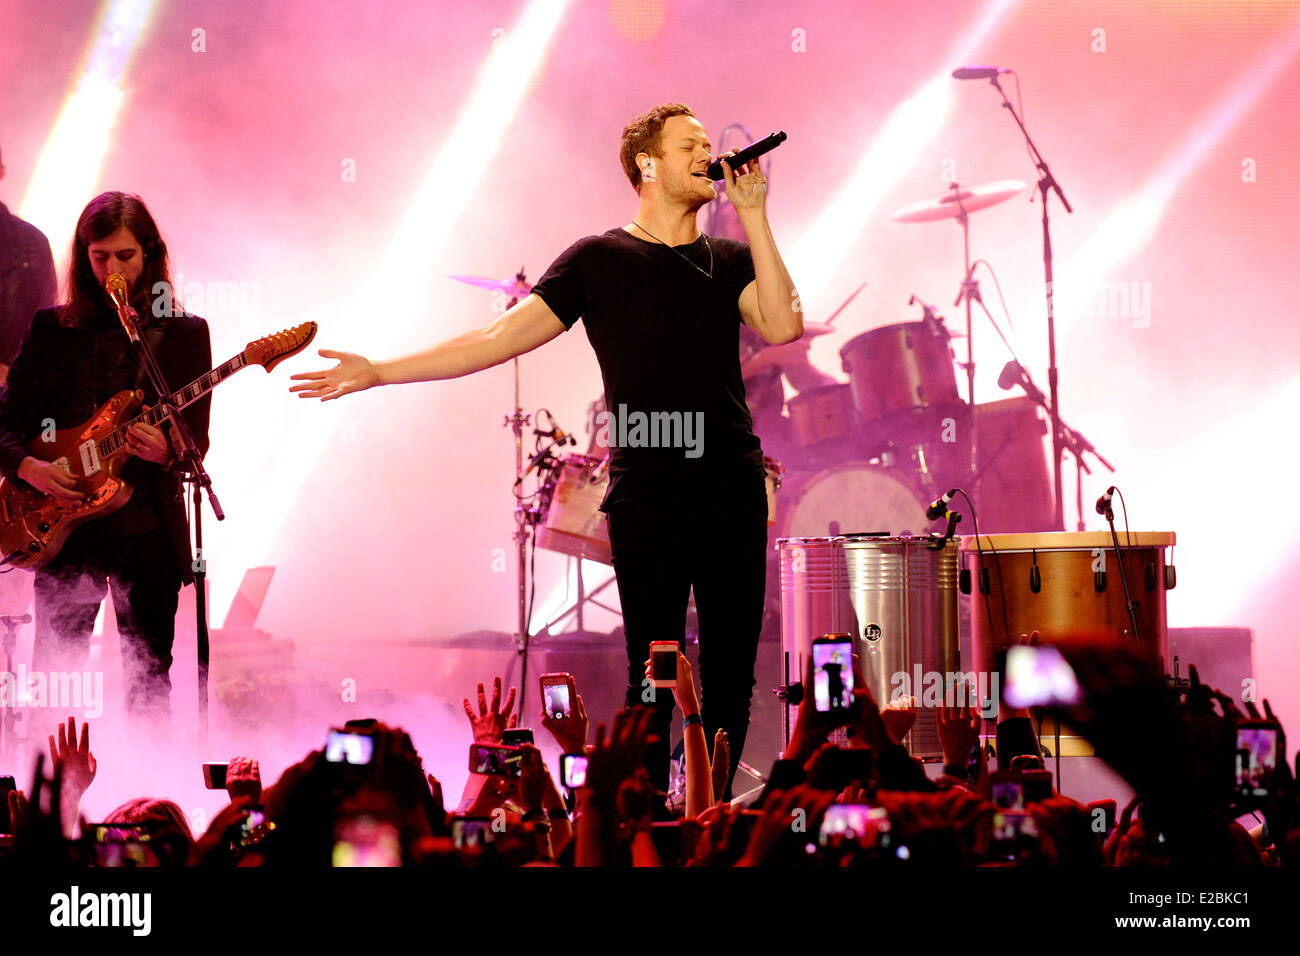 Imagine Dragons with lead singer Dan Reynolds performs at the 2014 MuchMusic Video Awards (MMVA). Stock Photo